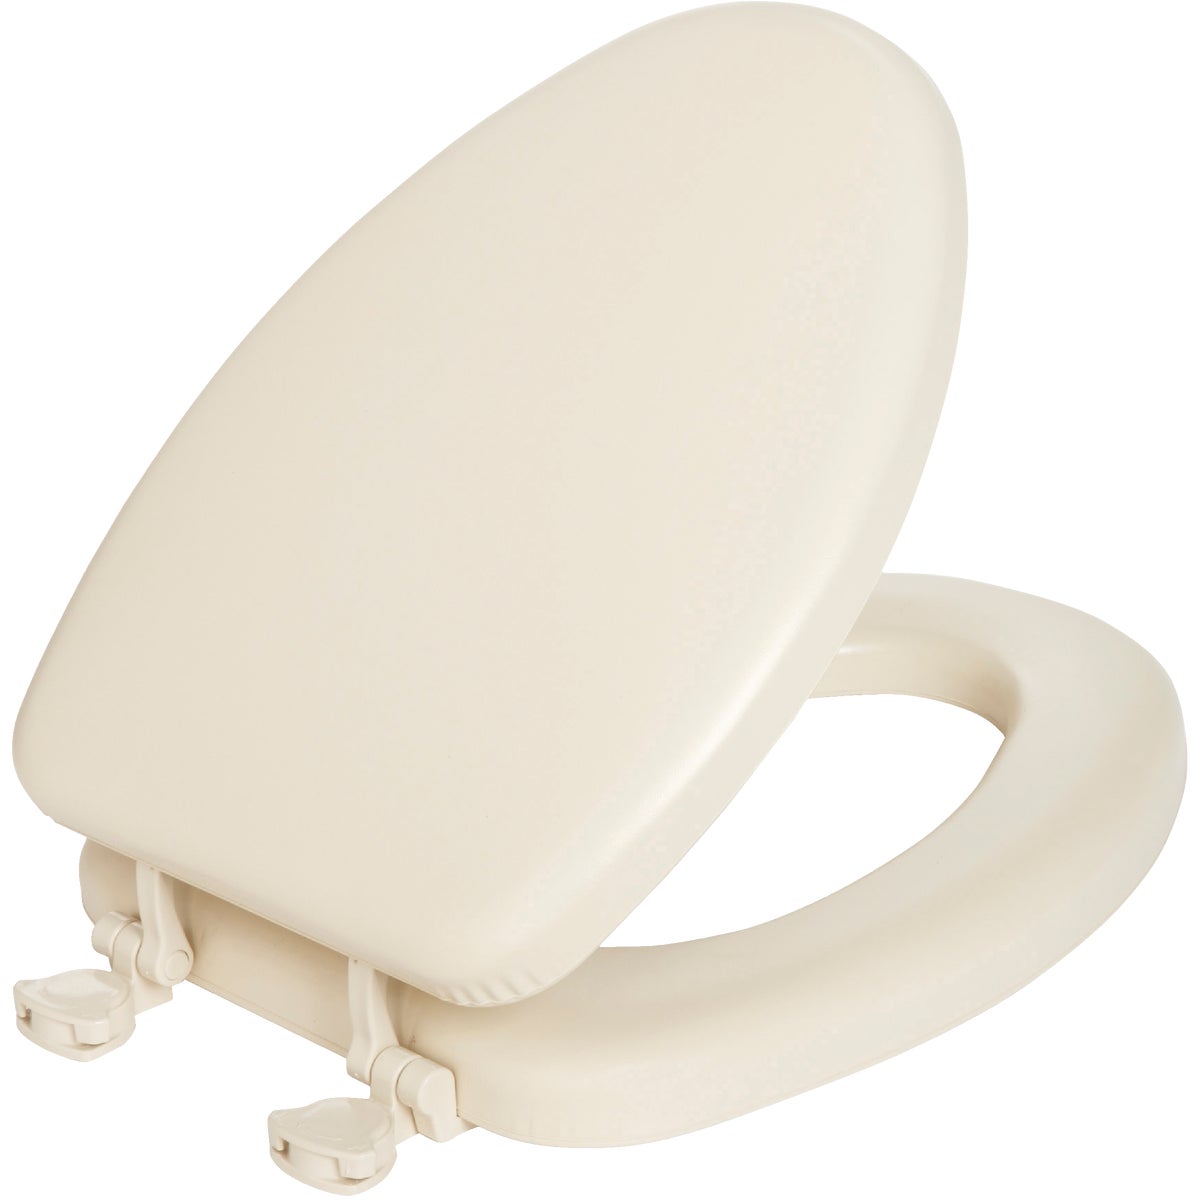 Item 446149, Mayfair by Bemis Elongated Cushioned Vinyl Soft Toilet Seat in with STA-